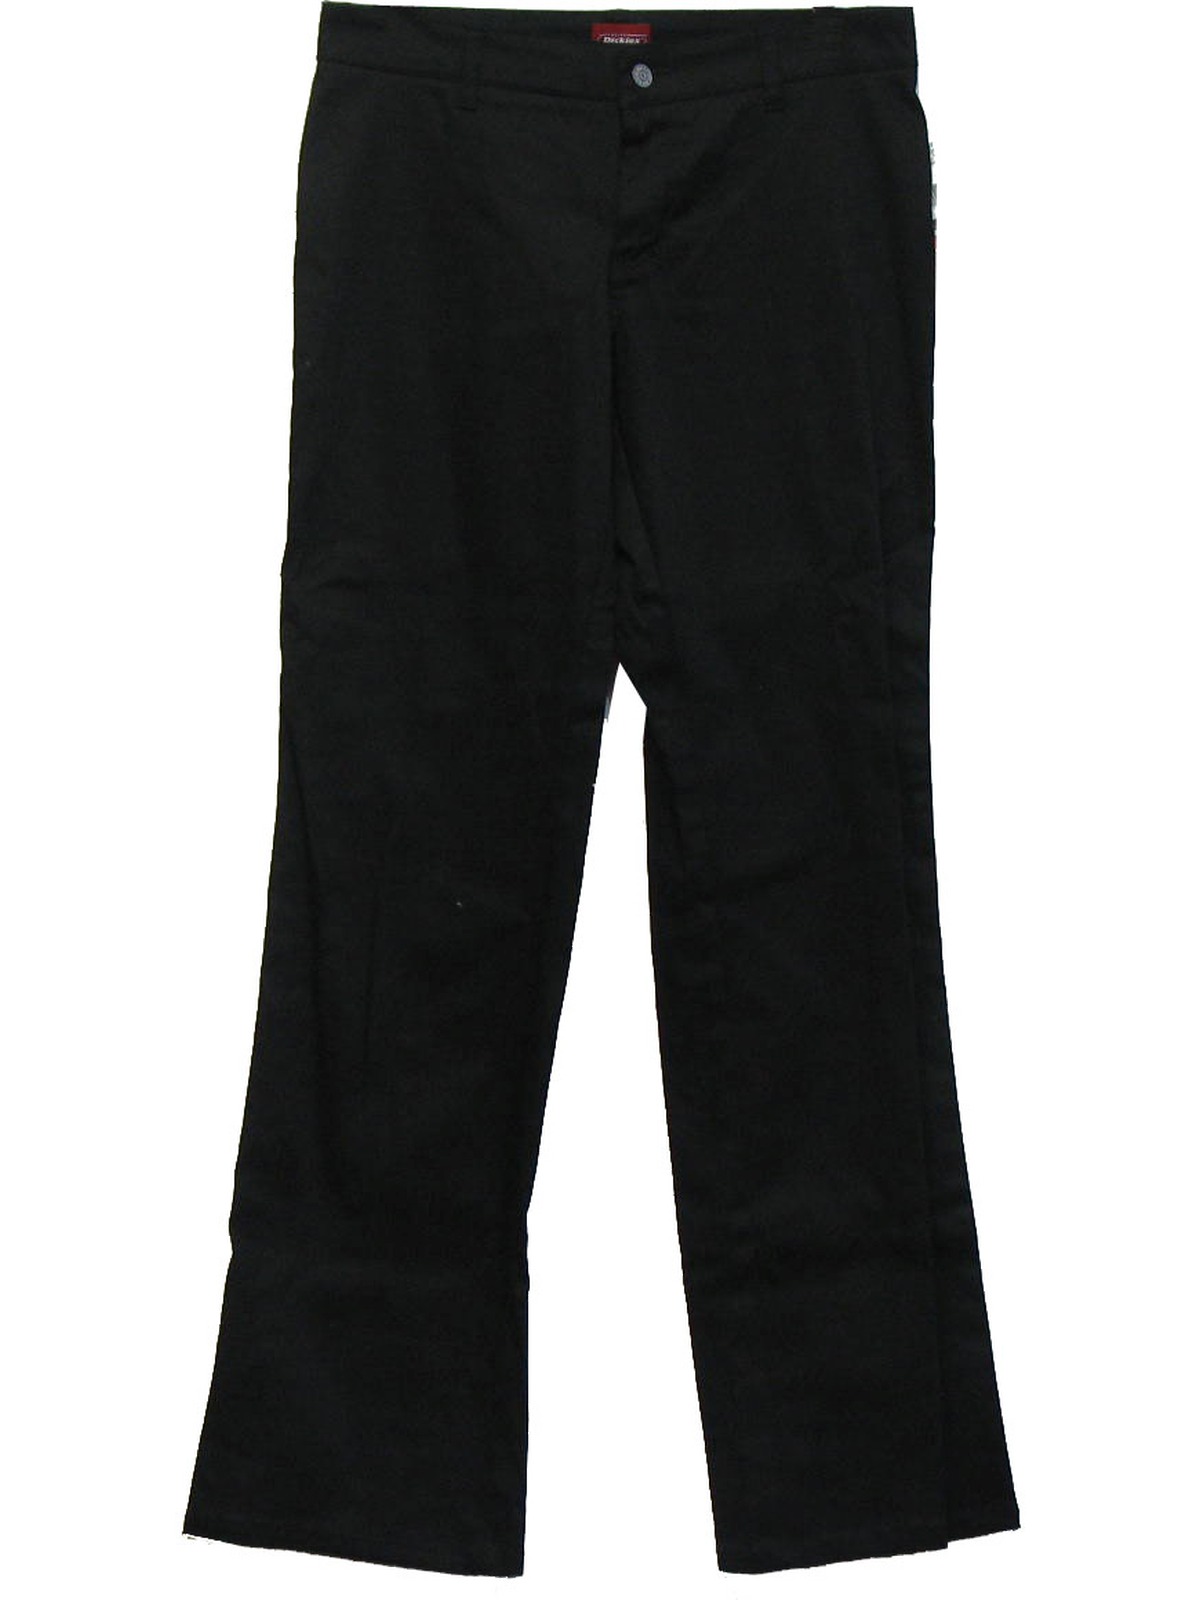 90s Retro Flared Pants / Flares: 90s -Dickies- Womens New-Old black ...